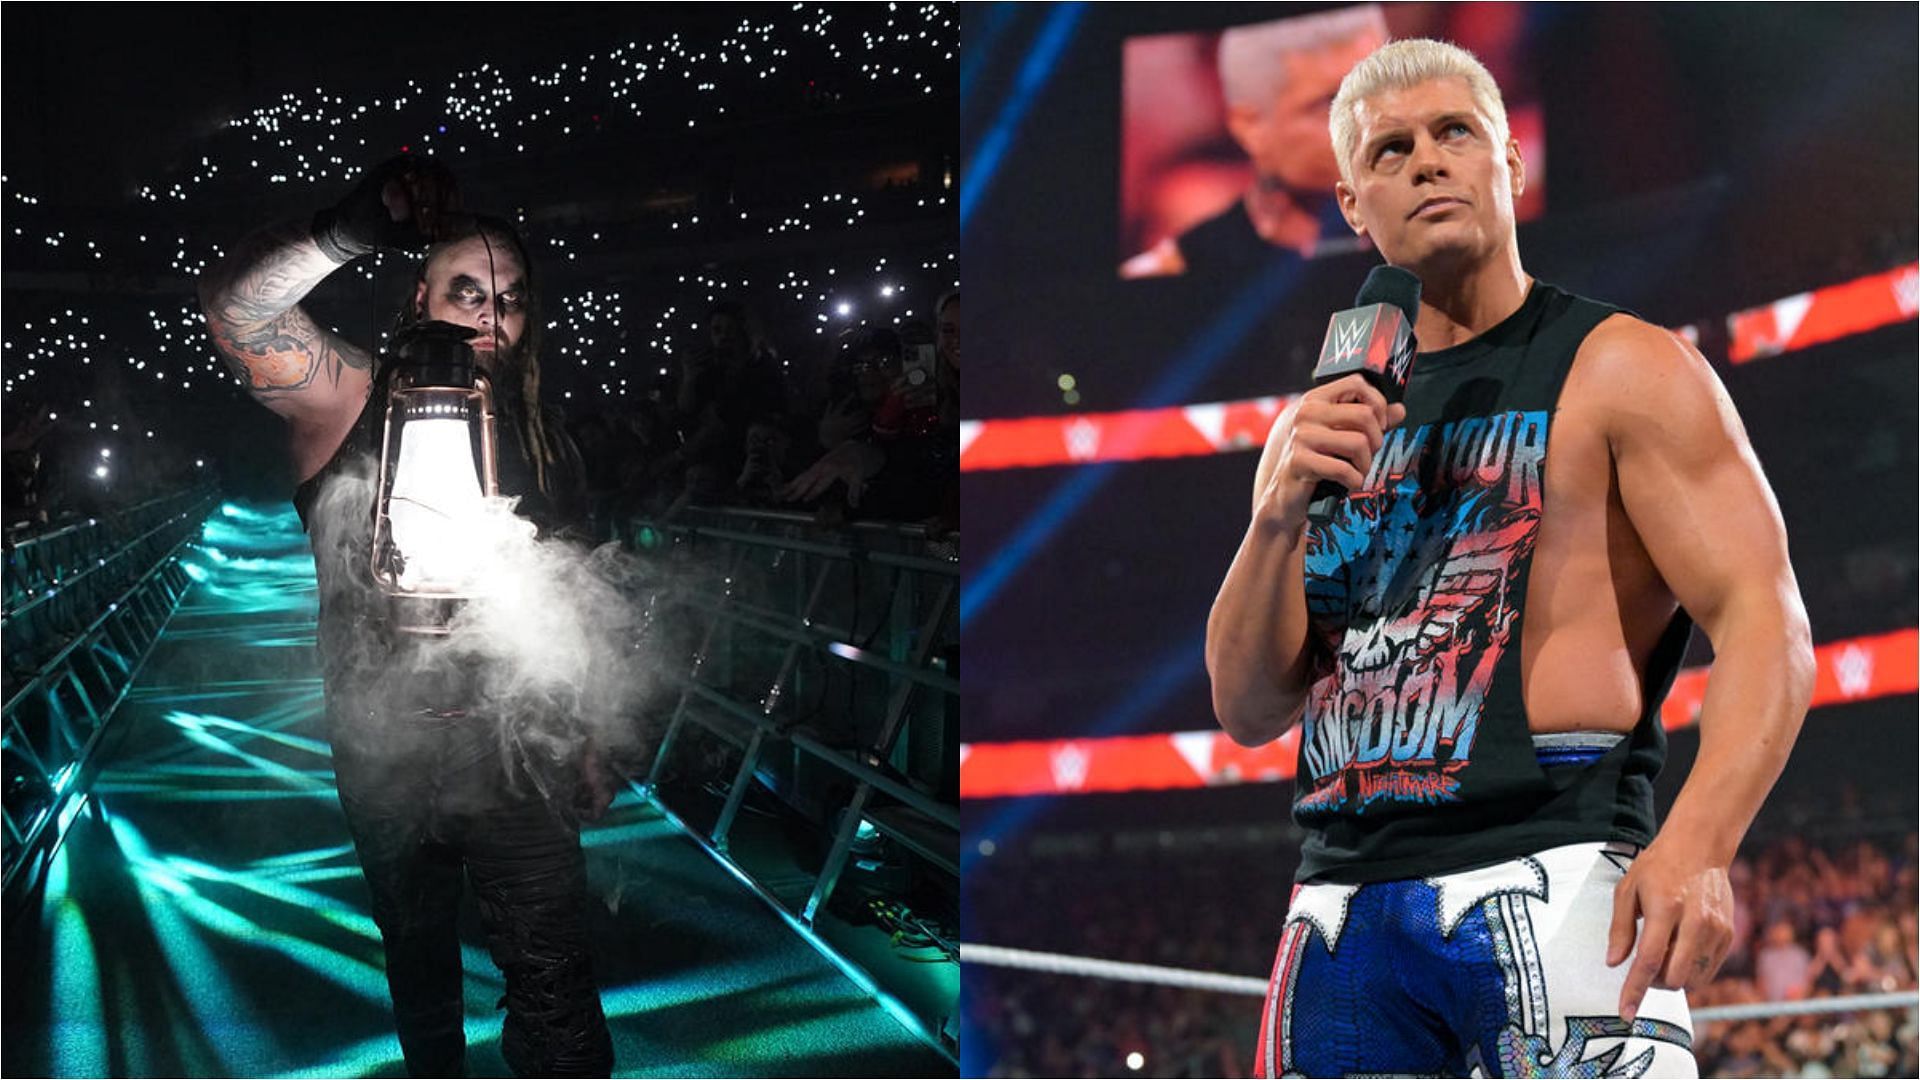 The Fireflies could come swarming to The American Nightmare at Summerslam 2023